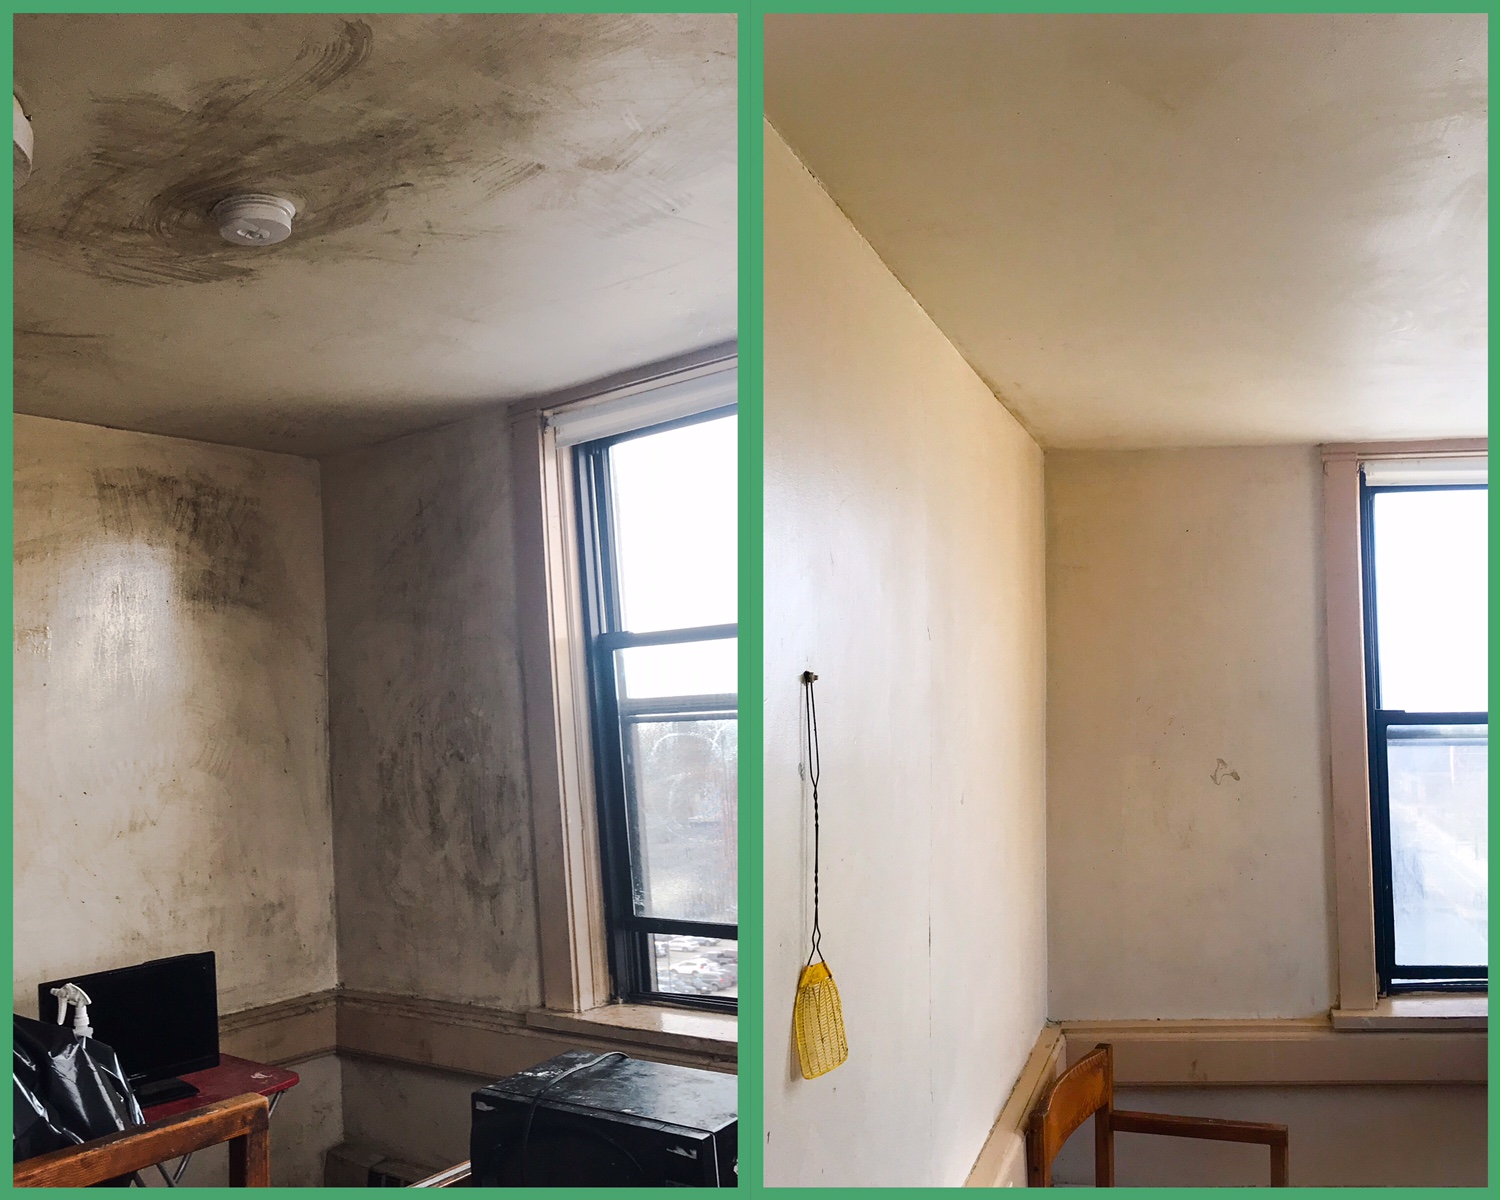 This Providence Apartment Building suffered from a Bio-Hazard caused by an evicted tenant. SERVPRO of Providence worked diligently to clean and deodorize the entire apartment from the human feces and urine left by the tenant. We also thermal fogged and used Hydroxyl technology to control the odor. These types of Bio-Hazard losses can be handled by our trained technicians that specialize in this field.